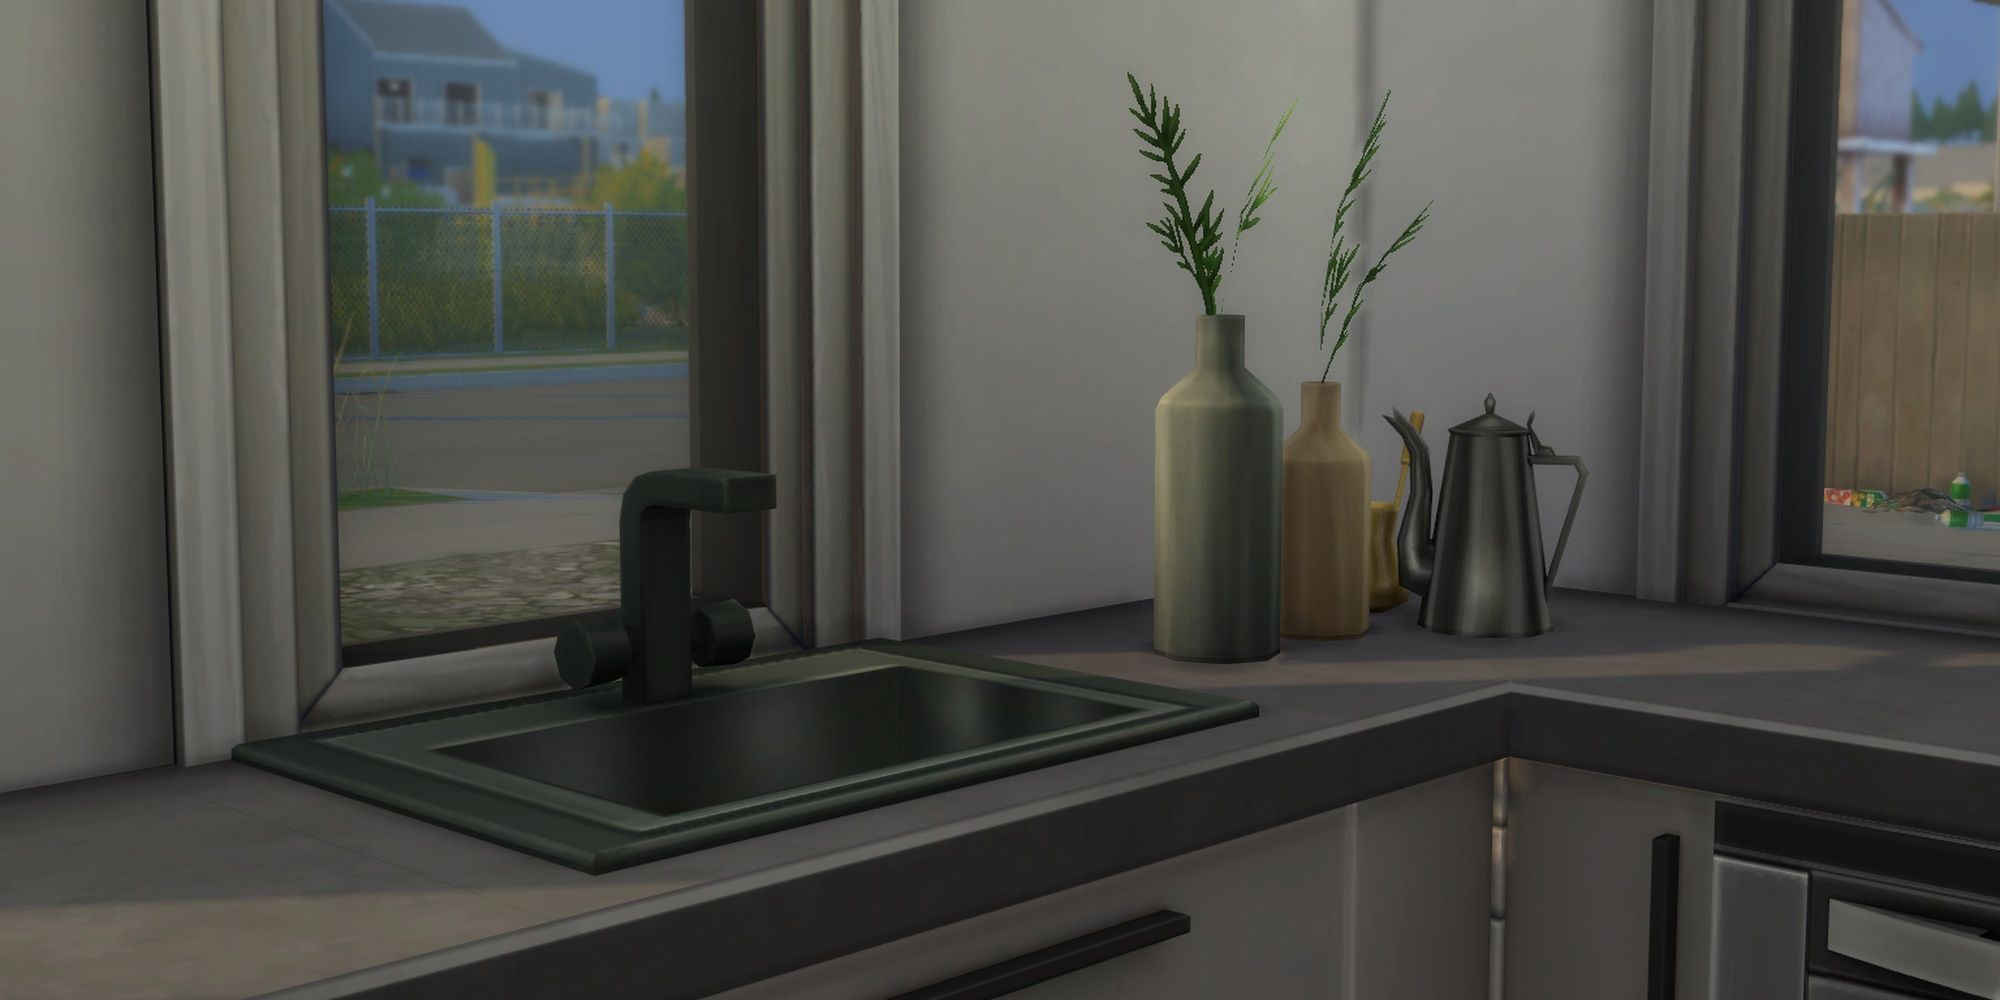 A couple of bottles holding small pine branches next to a kitchen sink in The Sims 4.